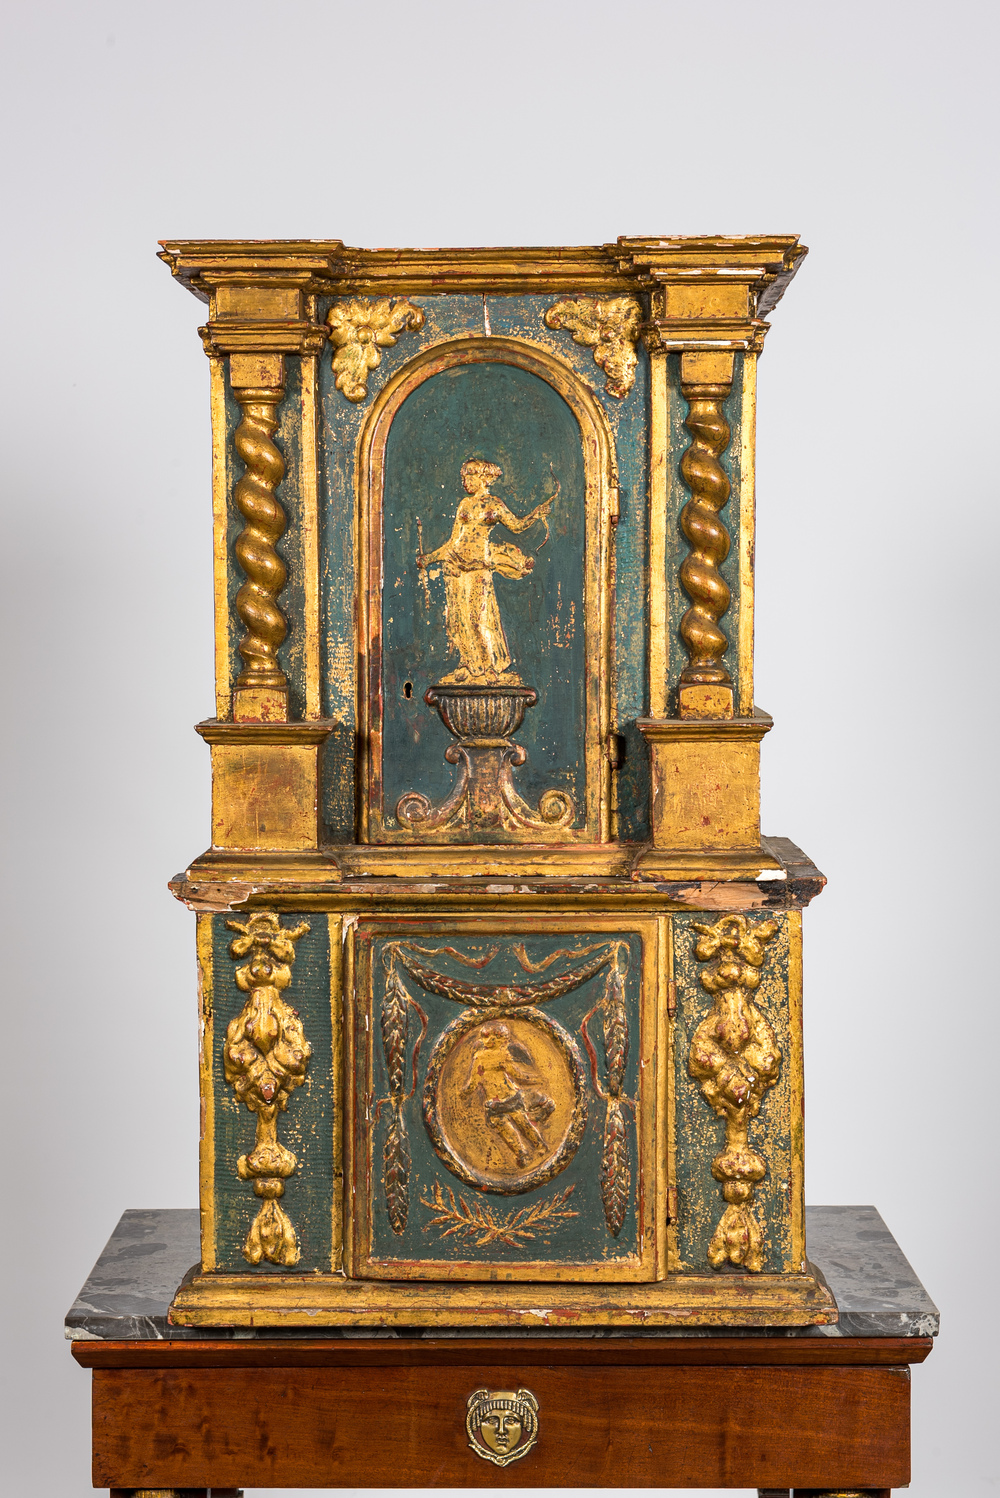 A two-part gilt and polychrome wooden tabernacle, 18th C.